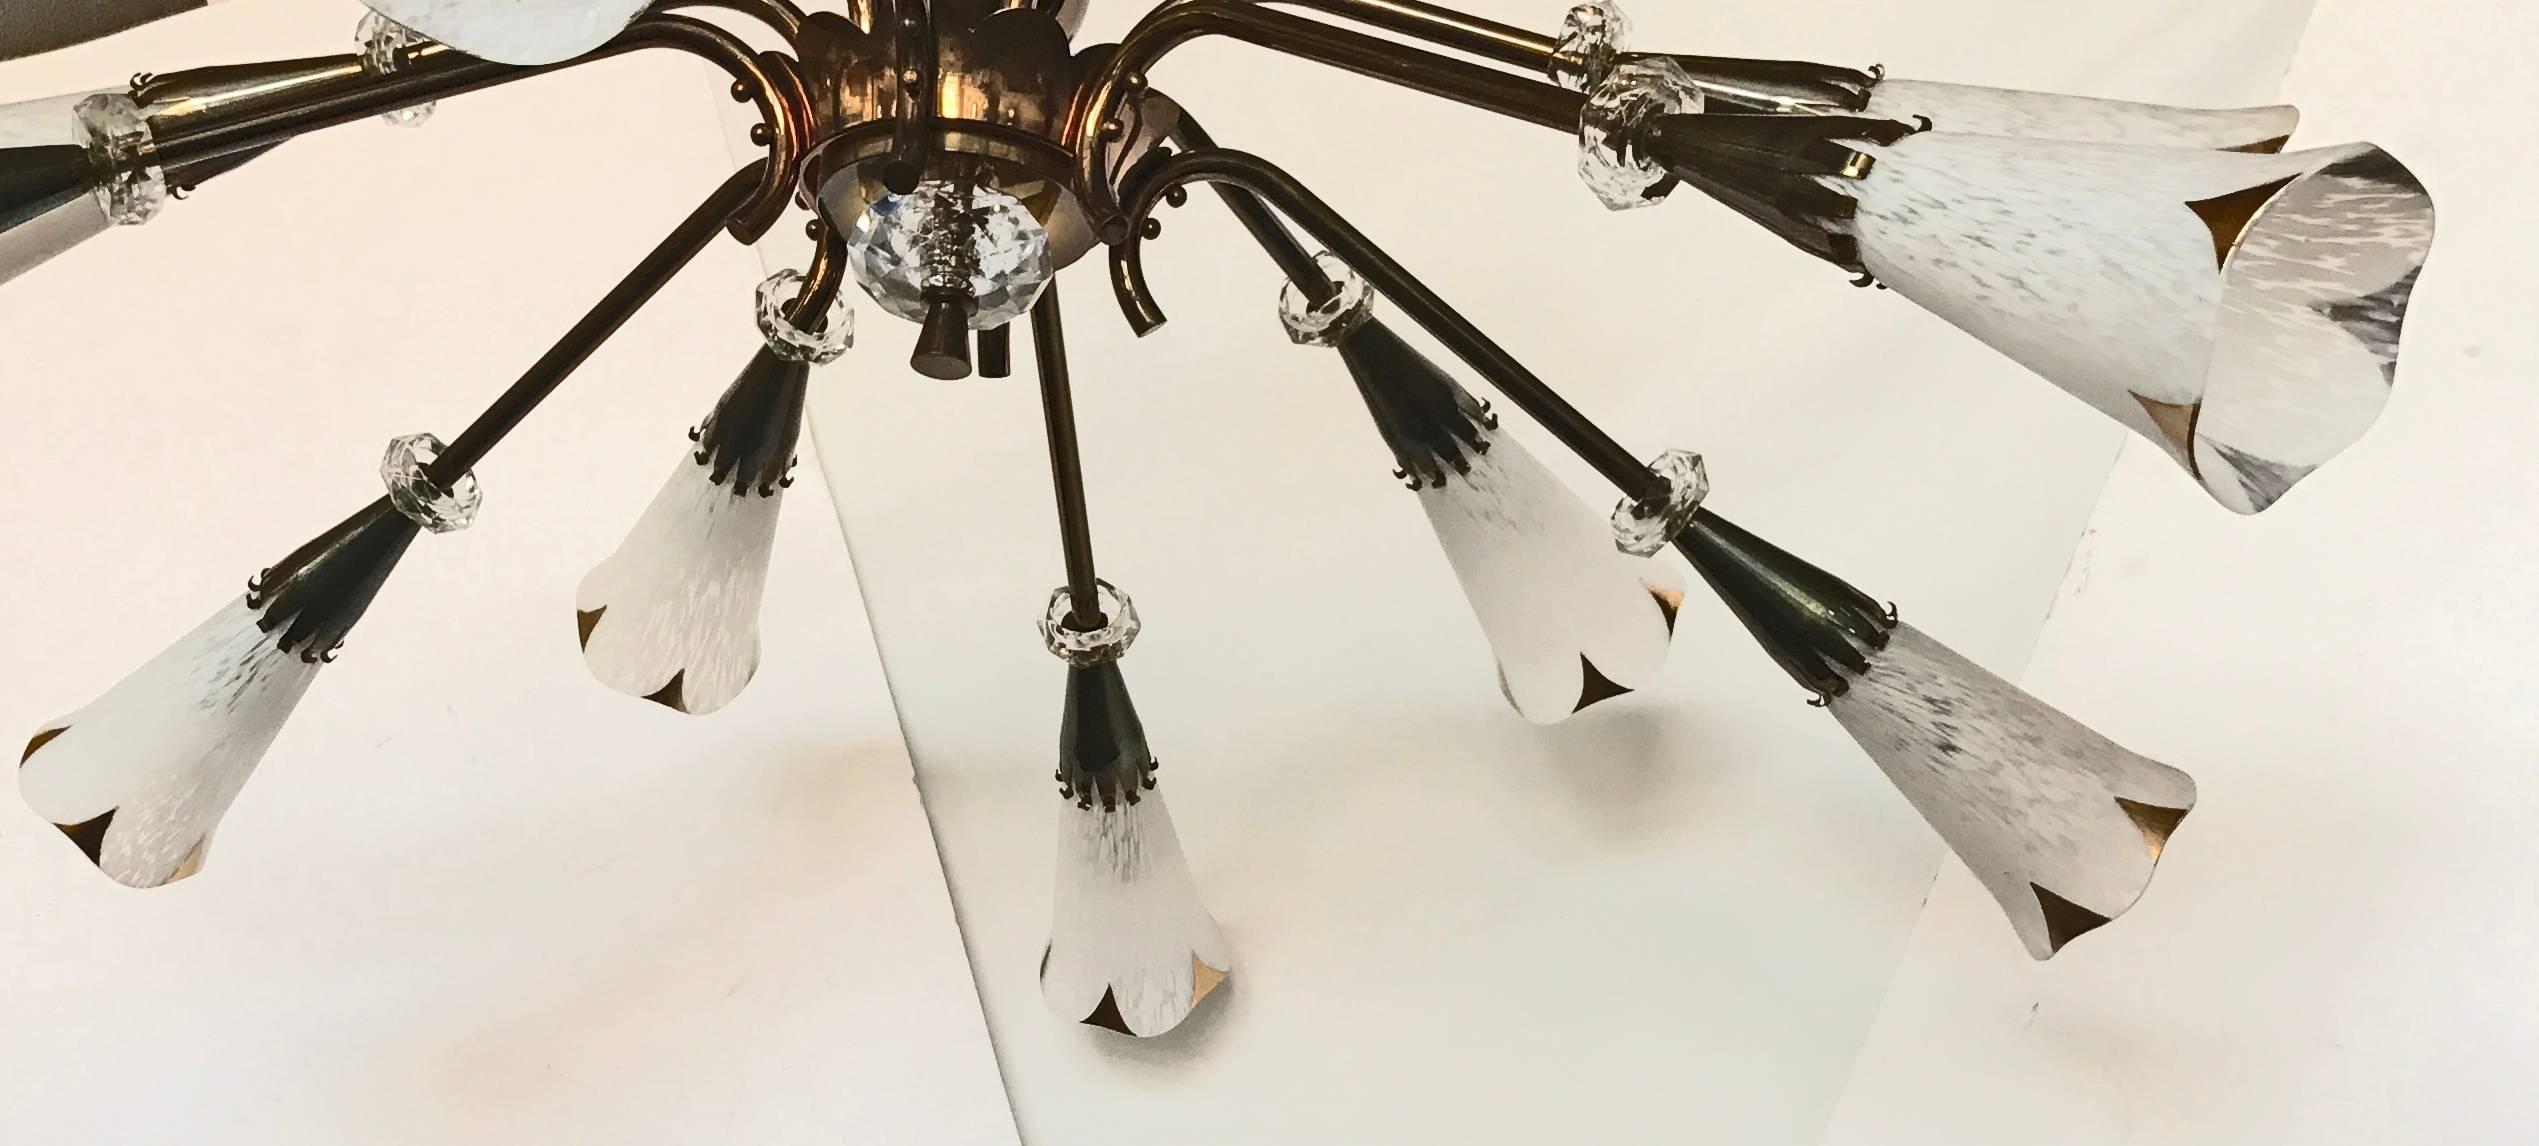 Superb 12 lights chandelier or flush mount made by Royal Lumières
Stem can be adjust to the needed dimension
12 light, 60 watt bulb max.
US rewires and in working